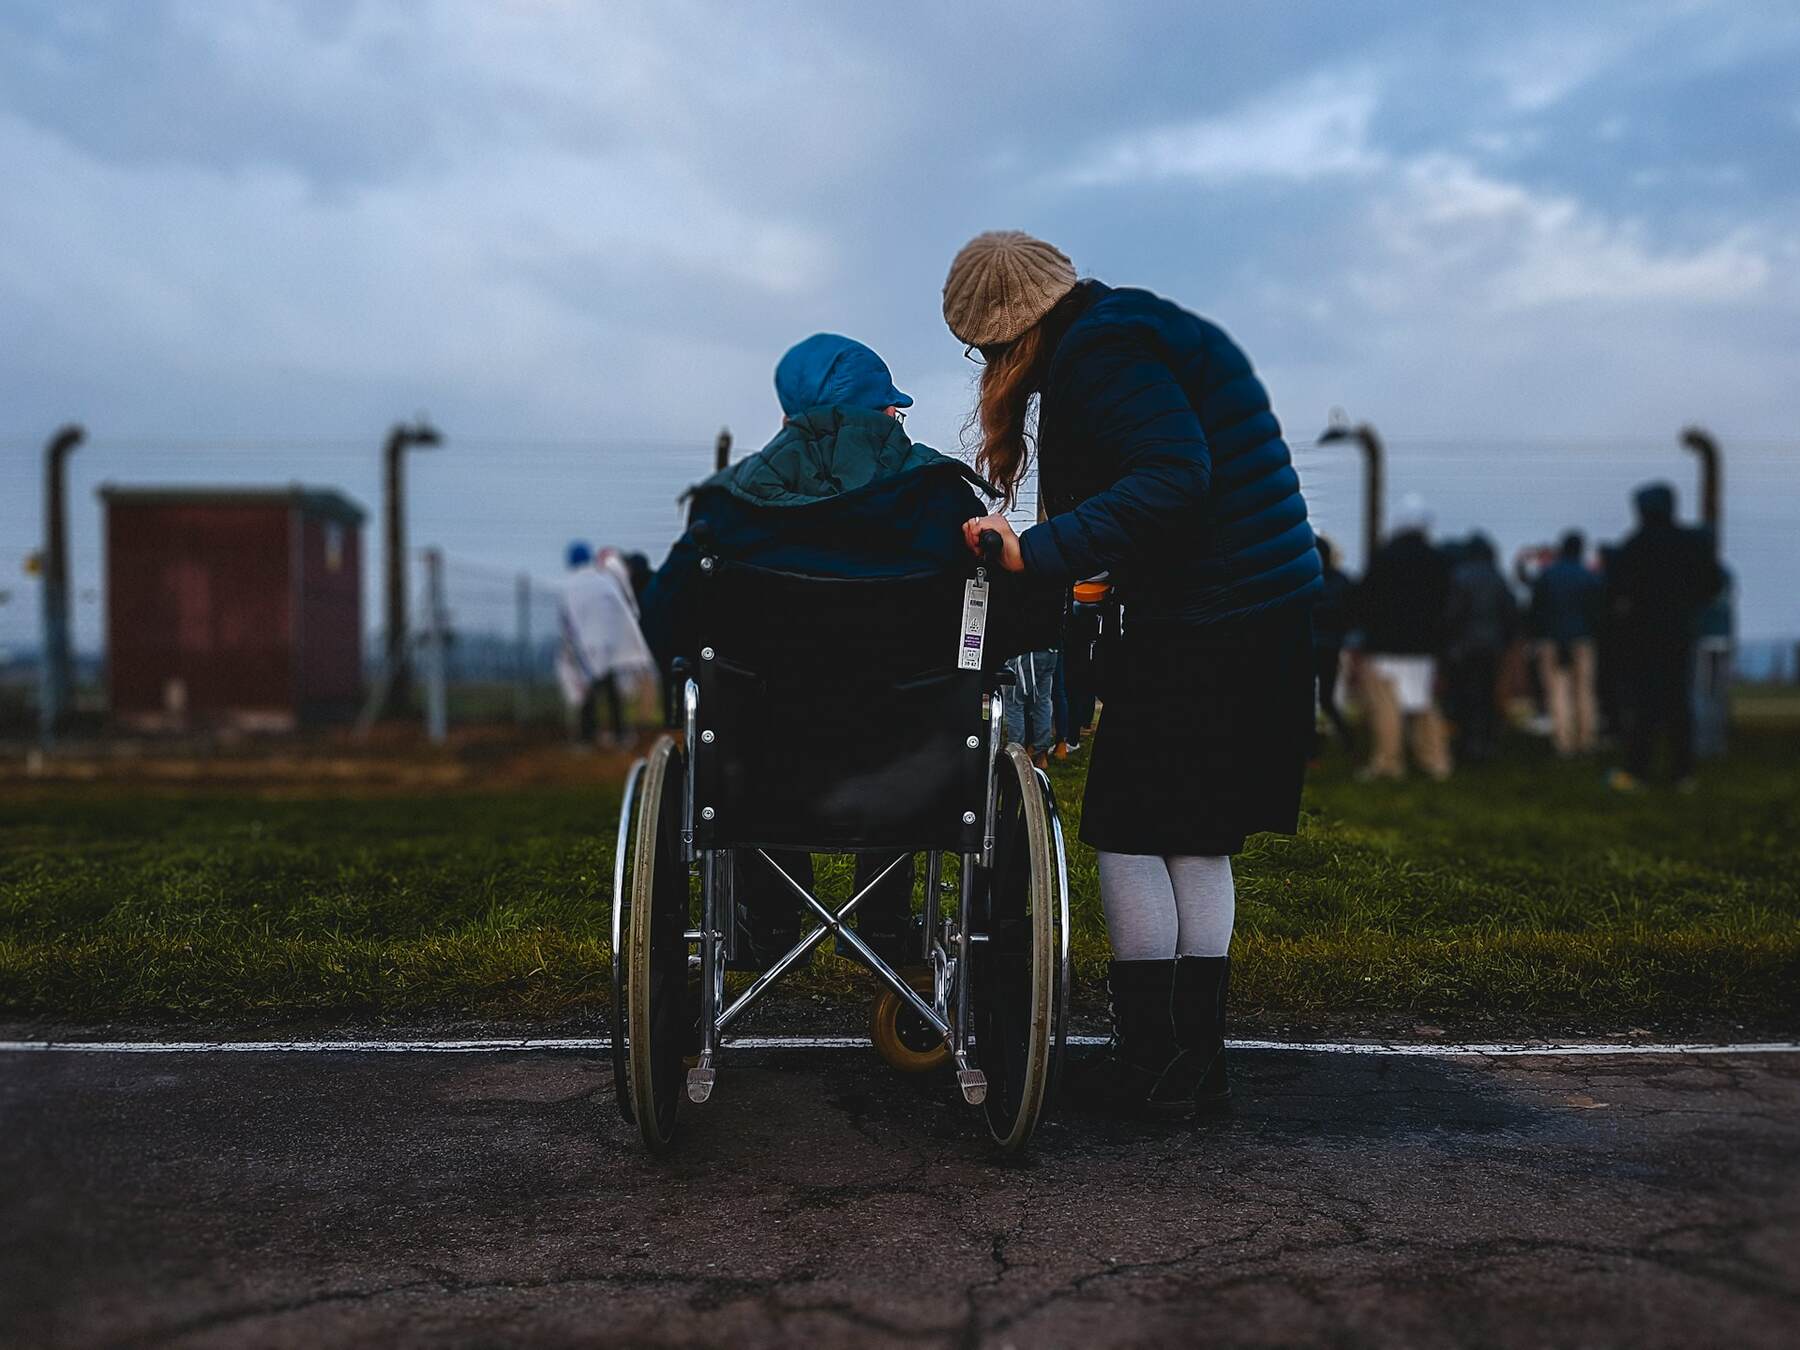 A woman assisting someone in a wheelchair